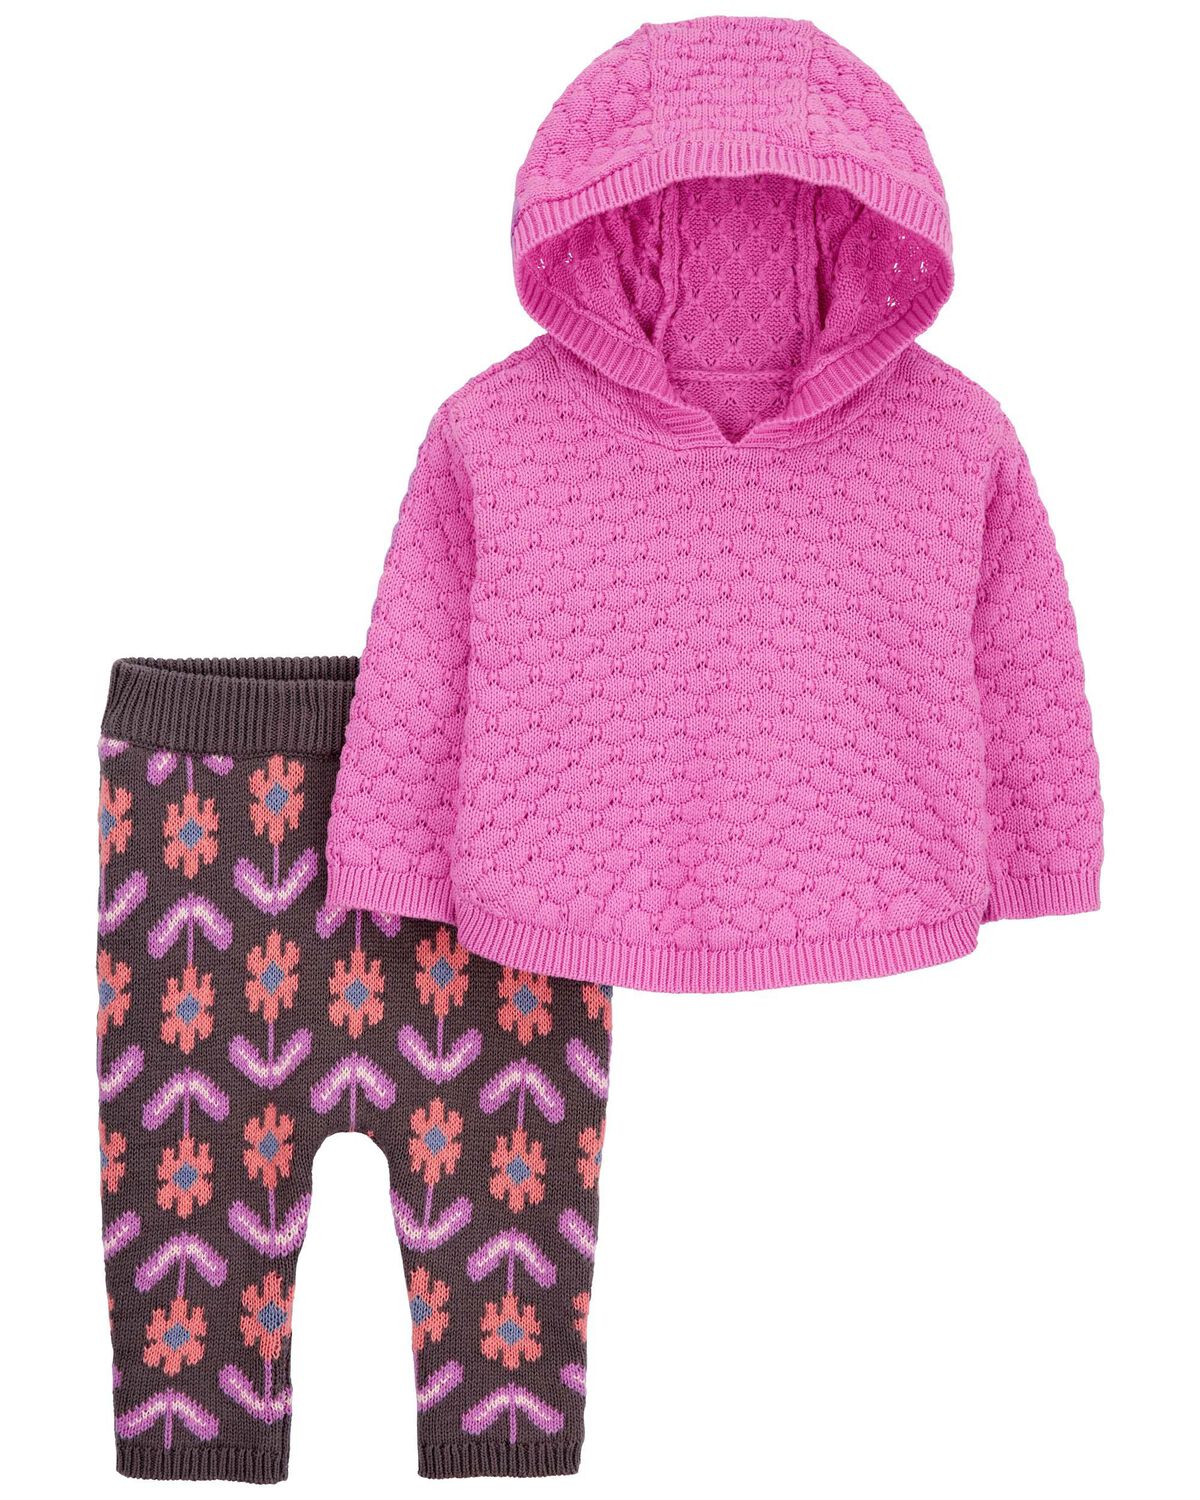 Baby Hooded Sweater & Knit Pants Set